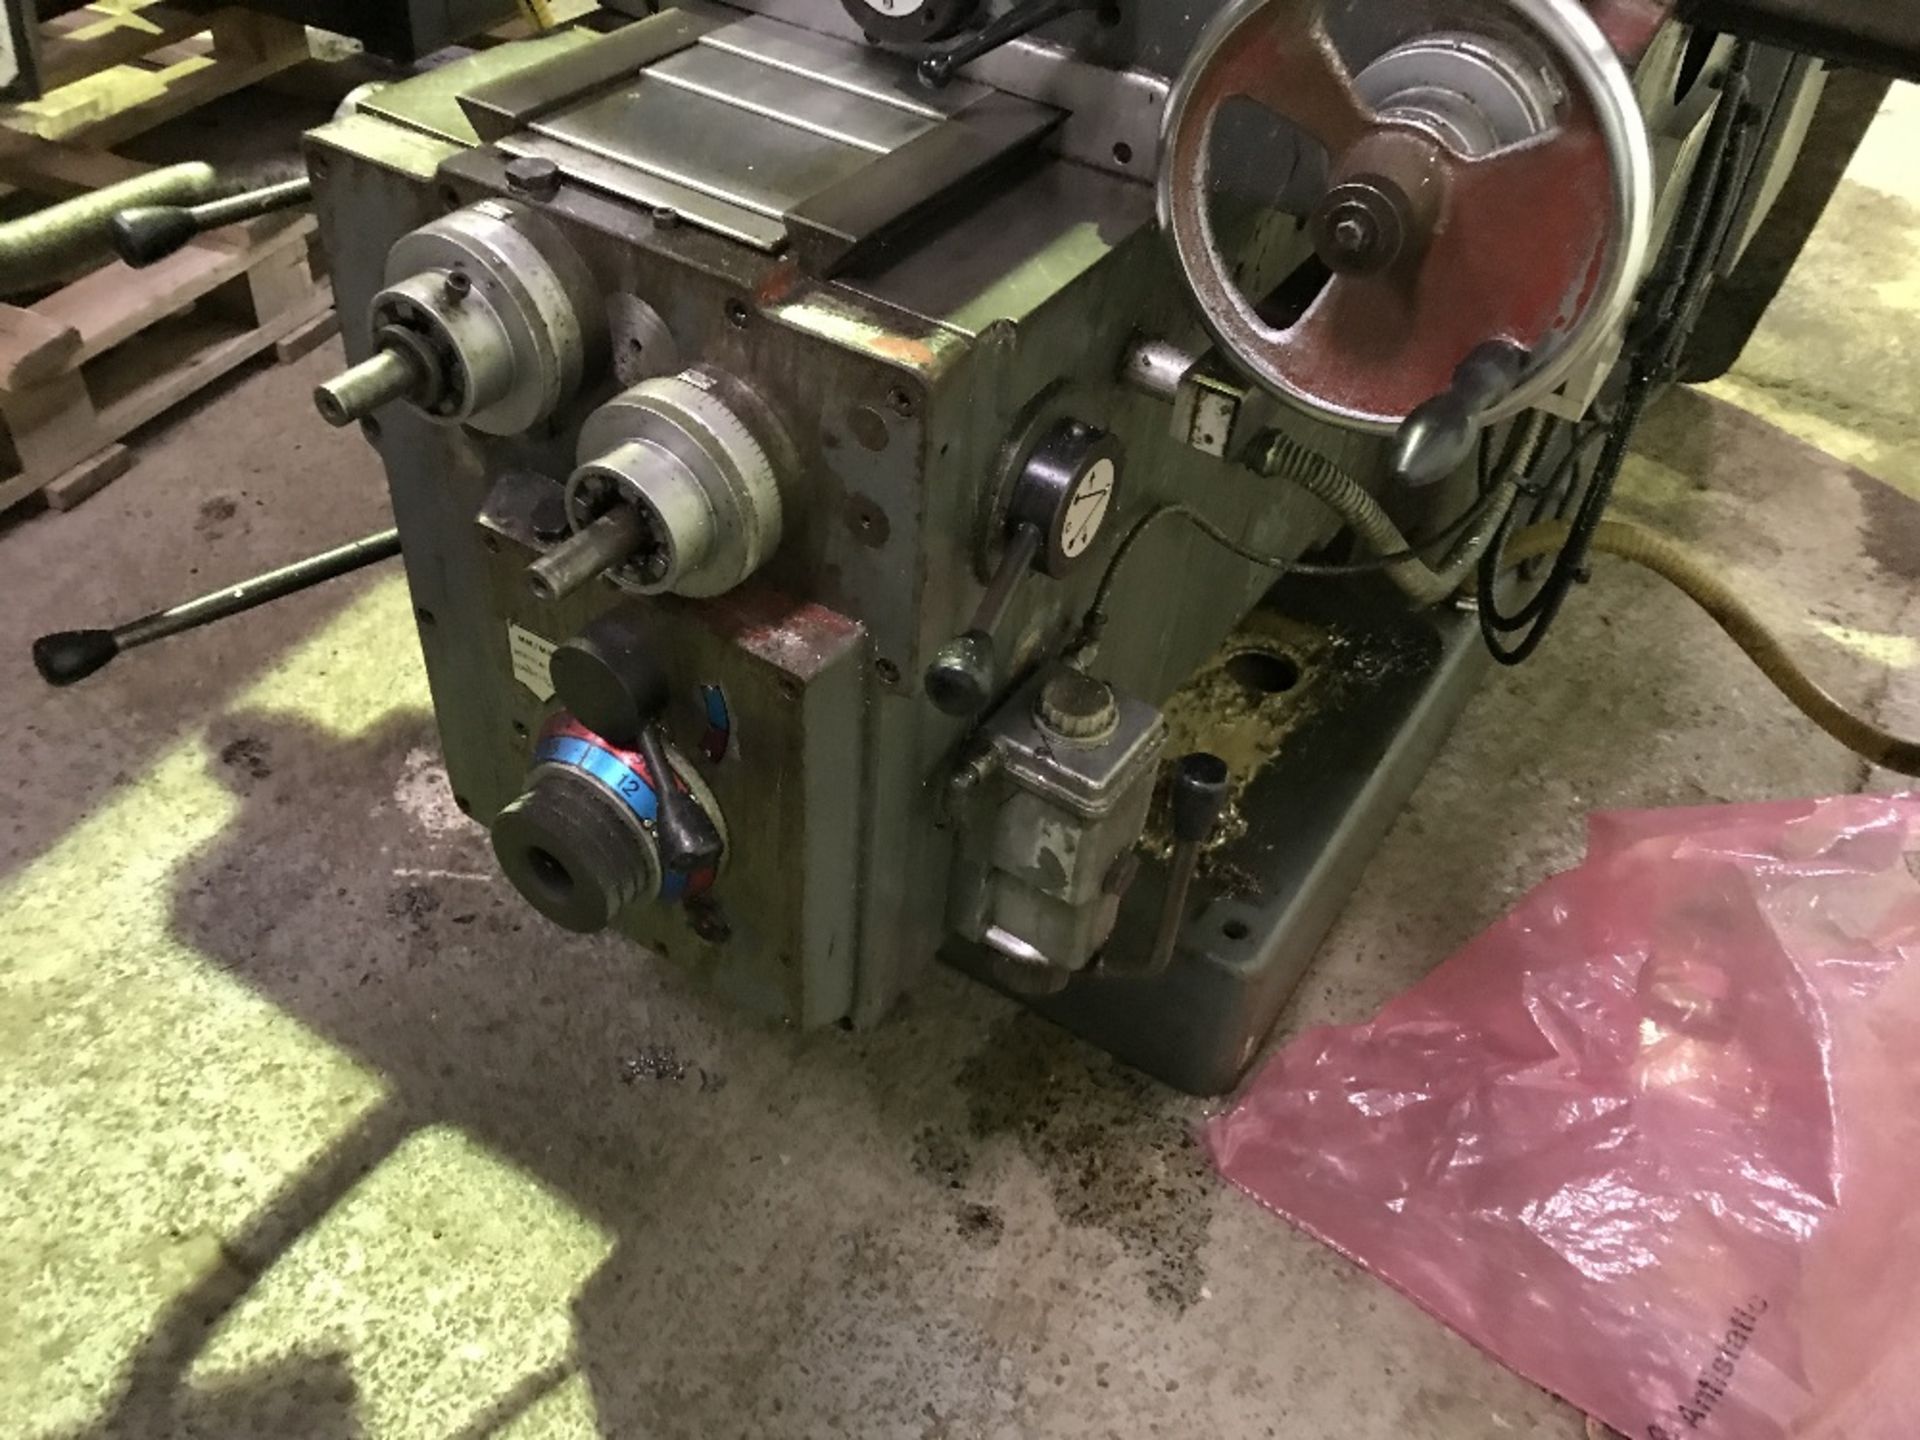 AJAX TURRET MILLING MACHINE WITH HEIDENHAIN XYZ CONTROL UNIT SN: 30438B46252 Sourced directly from a - Image 7 of 9